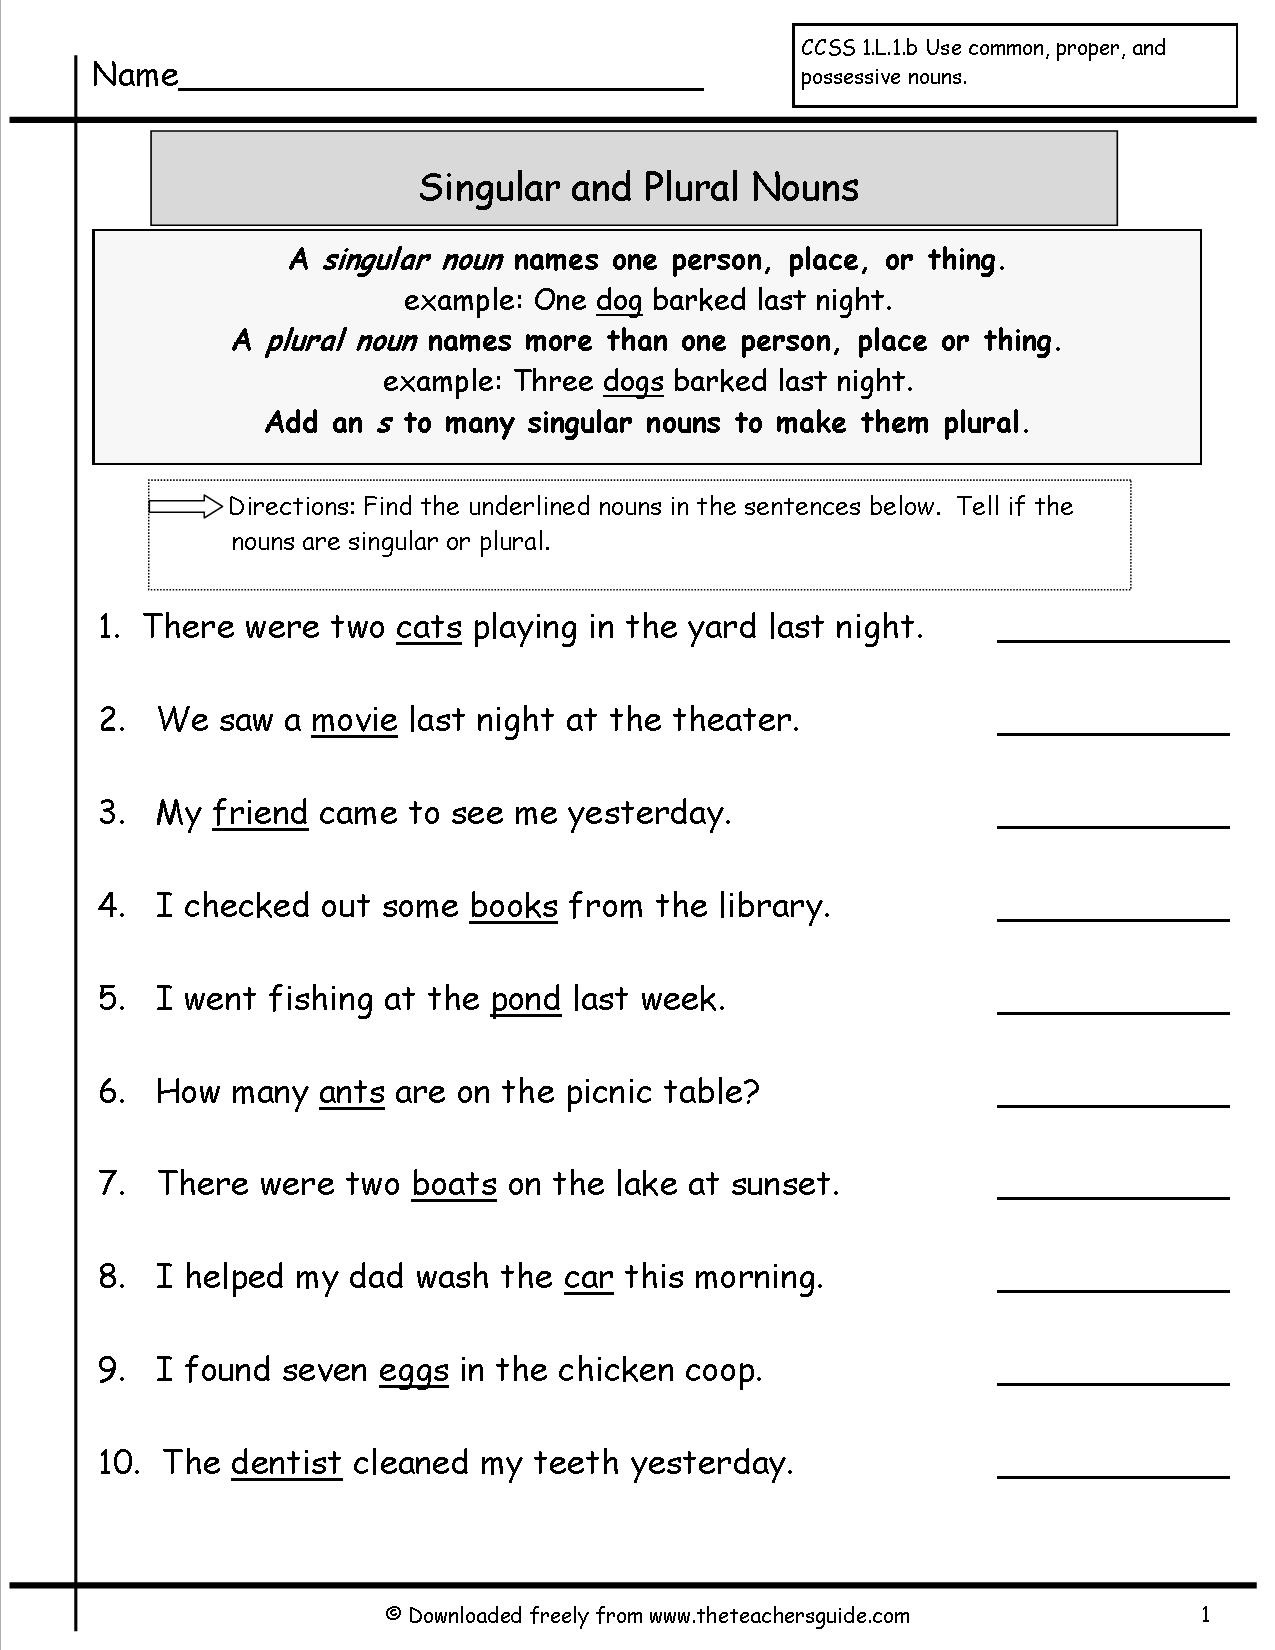 Singular And Plural Nouns Worksheets From The Teacher&amp;#039;s Guide - Free Printable Making Change Worksheets